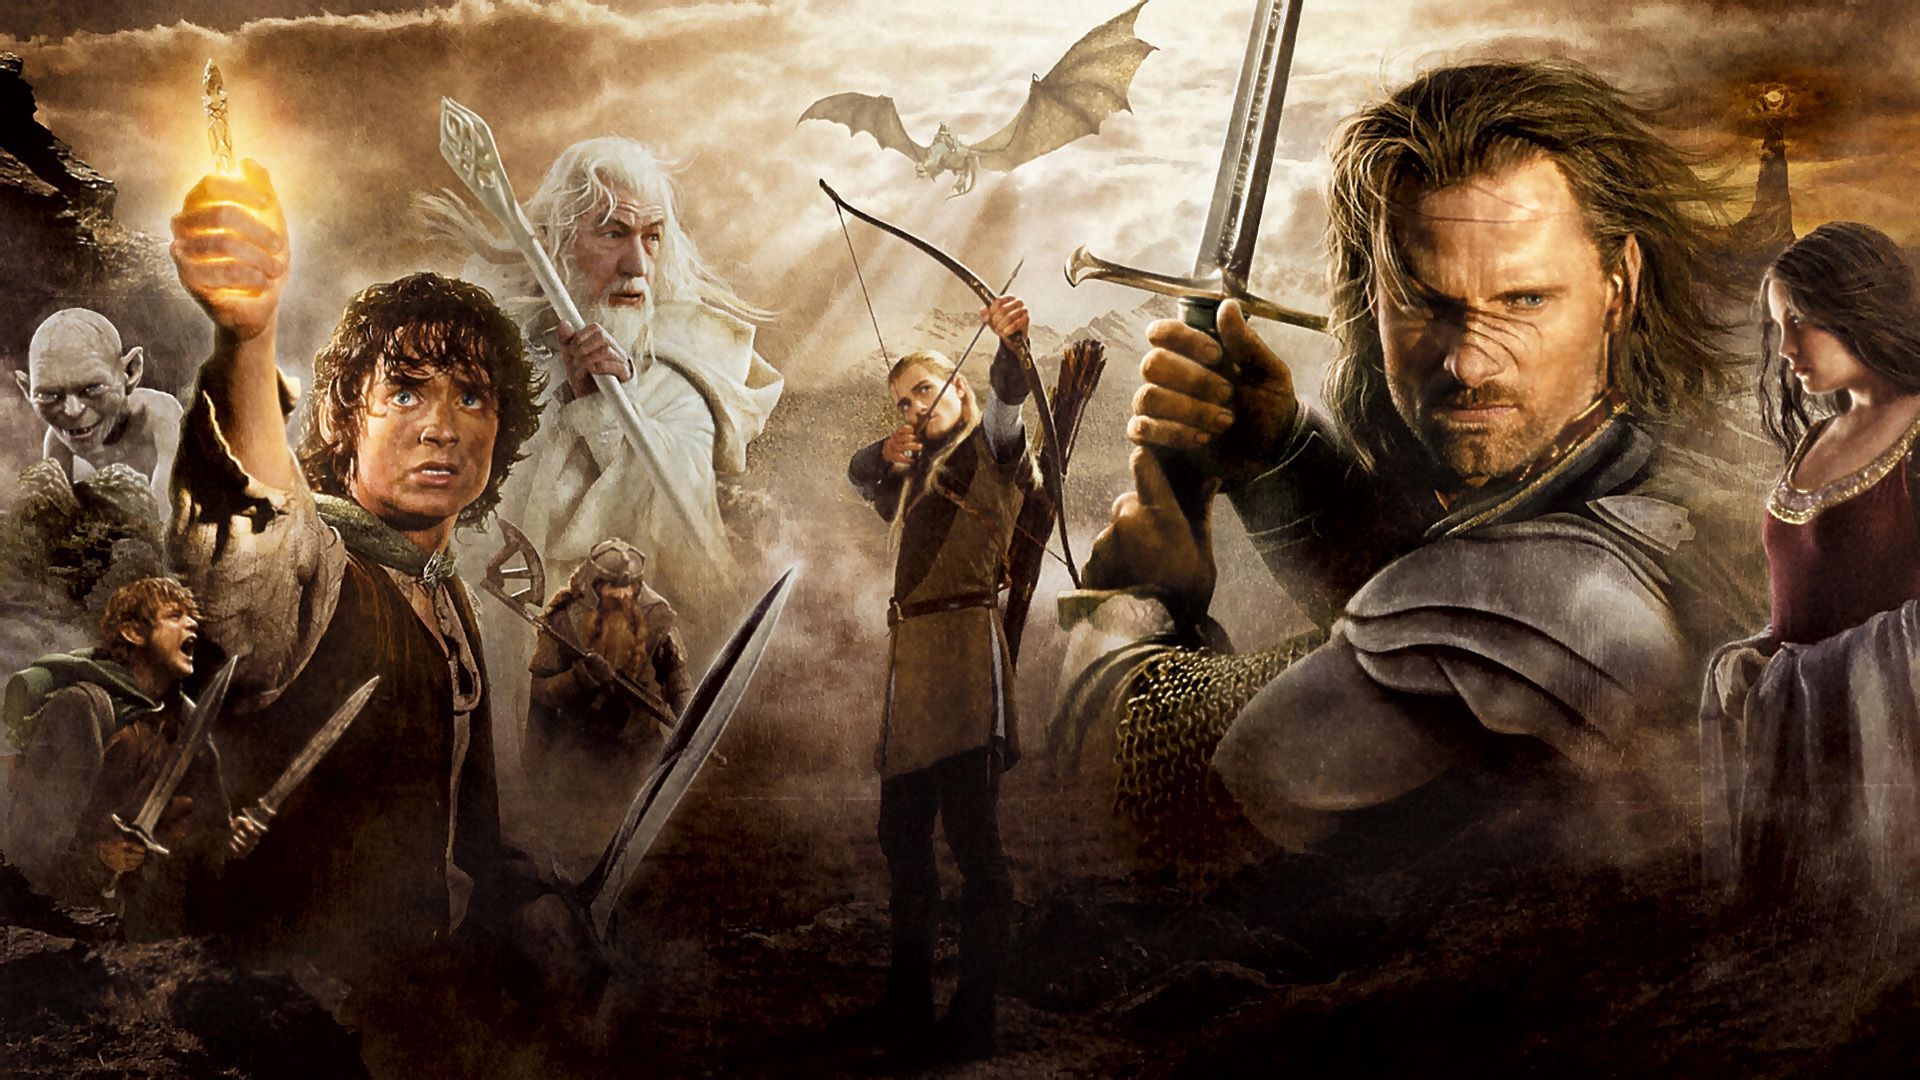 Lord of the Rings wallpaper 17275 1920x1080